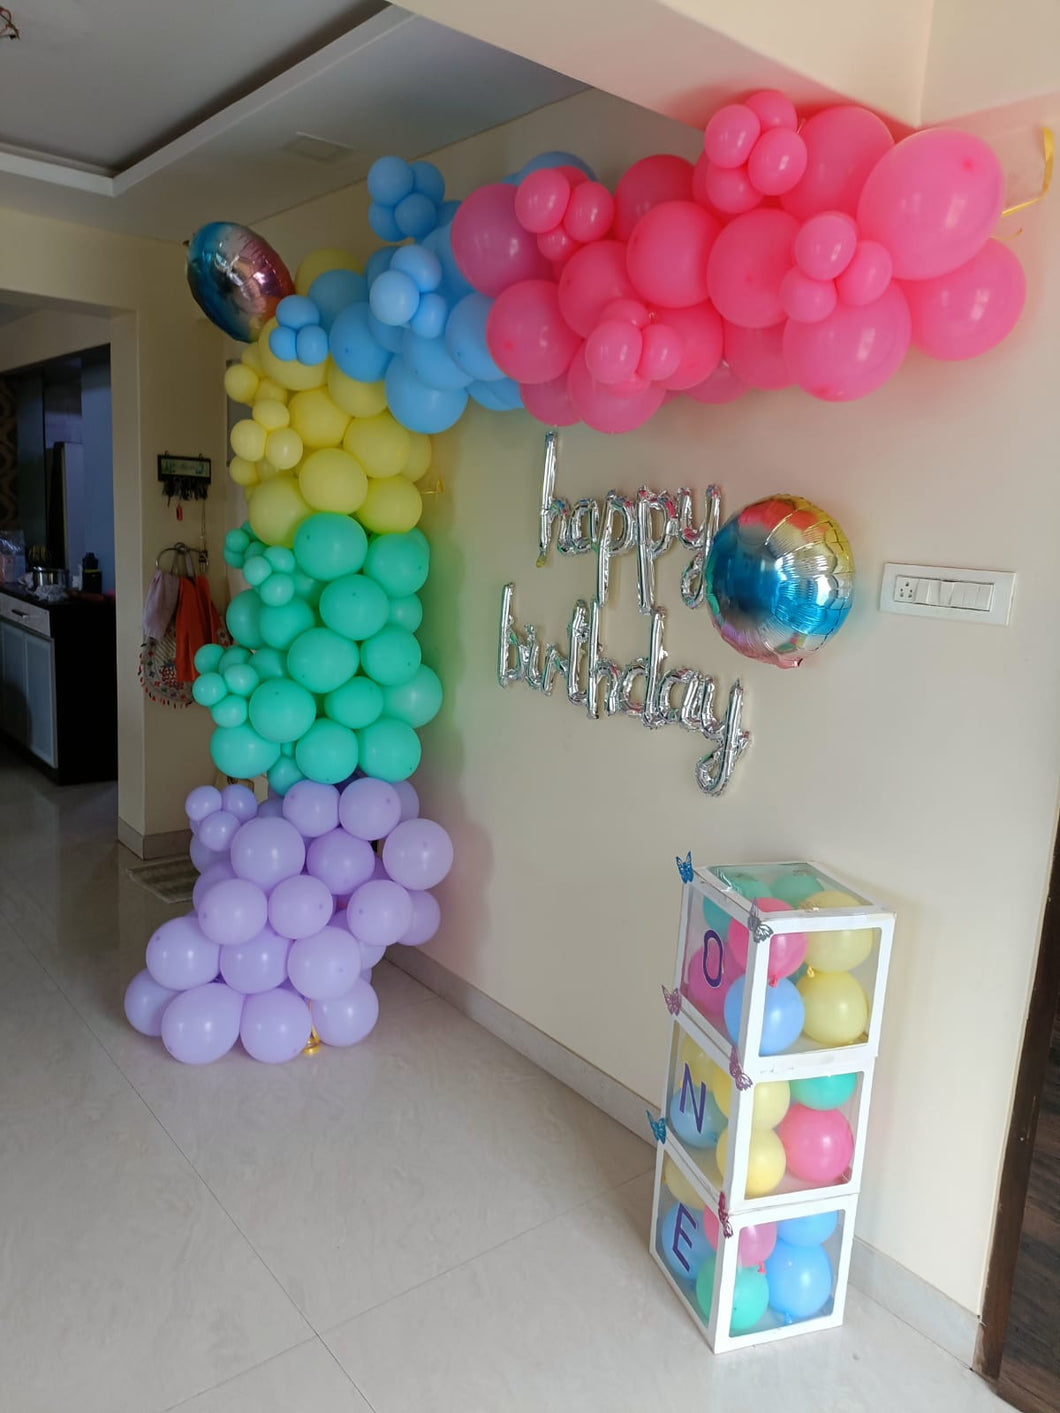 Birthday Balloon Decoration - Pretty colours on the wall